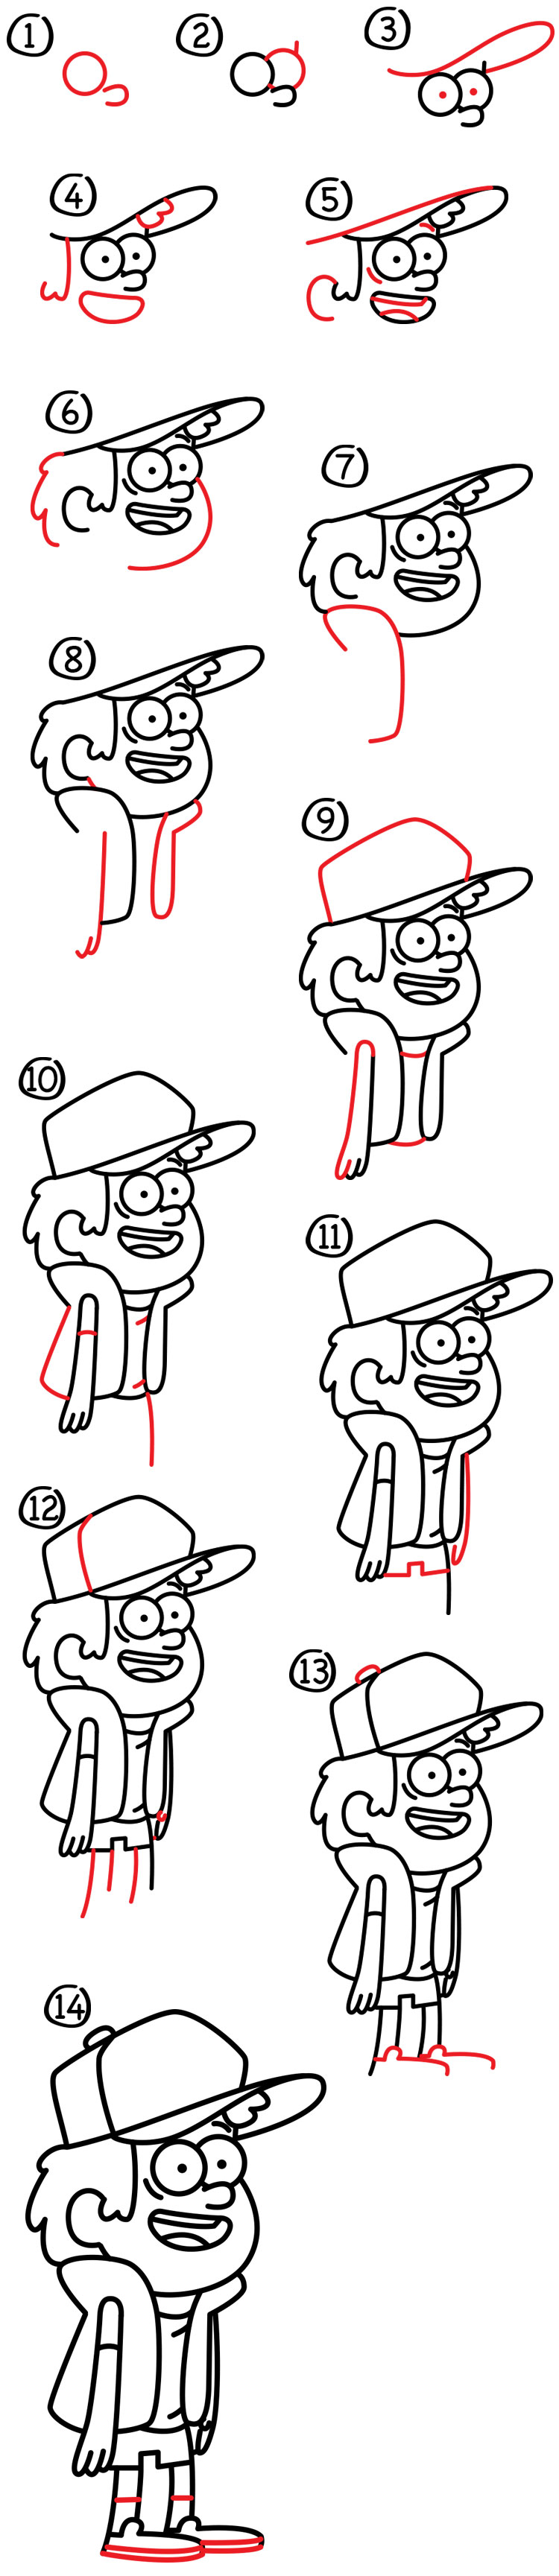 How To Draw Dipper From Gravity Falls Art For Kids Hub